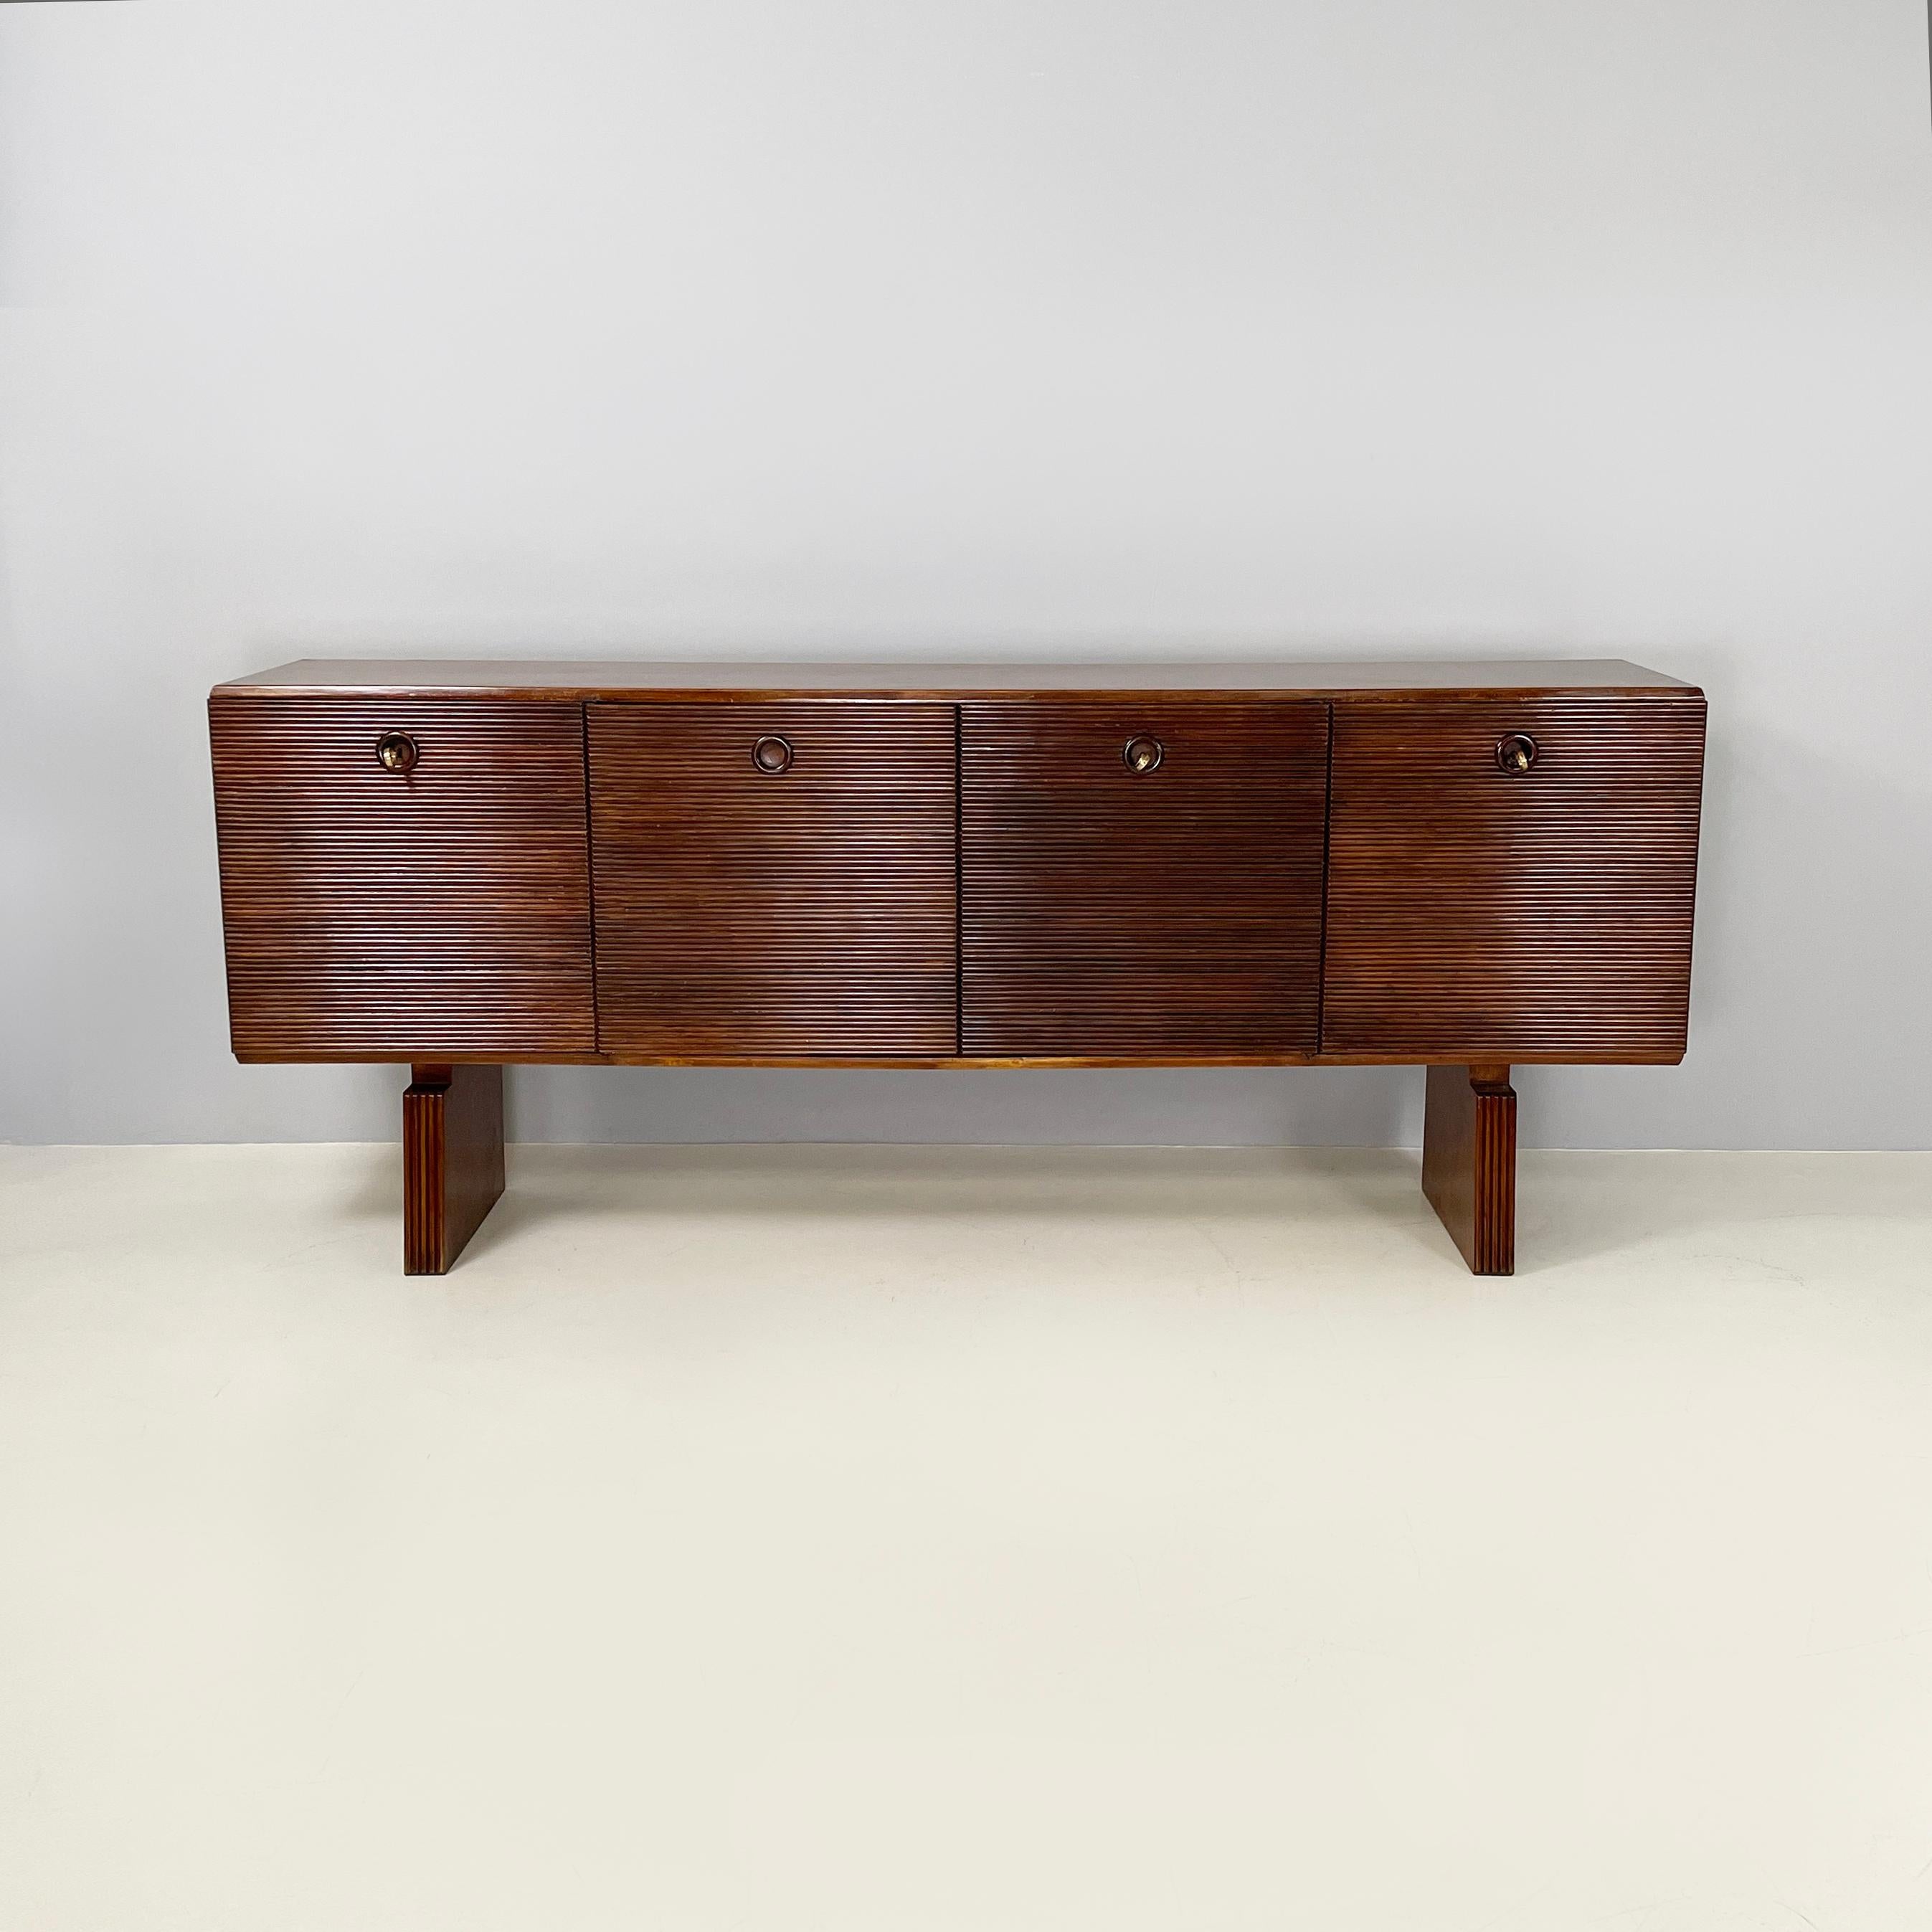 Italian Art Deco wooden sideboard with four doors by Gio Ponti, 1940s 
Sideboard with rectangular wooden top. It has four striped wood doors, each with a hole with a turned wooden frame that acts as a handle. Three out of four doors have working